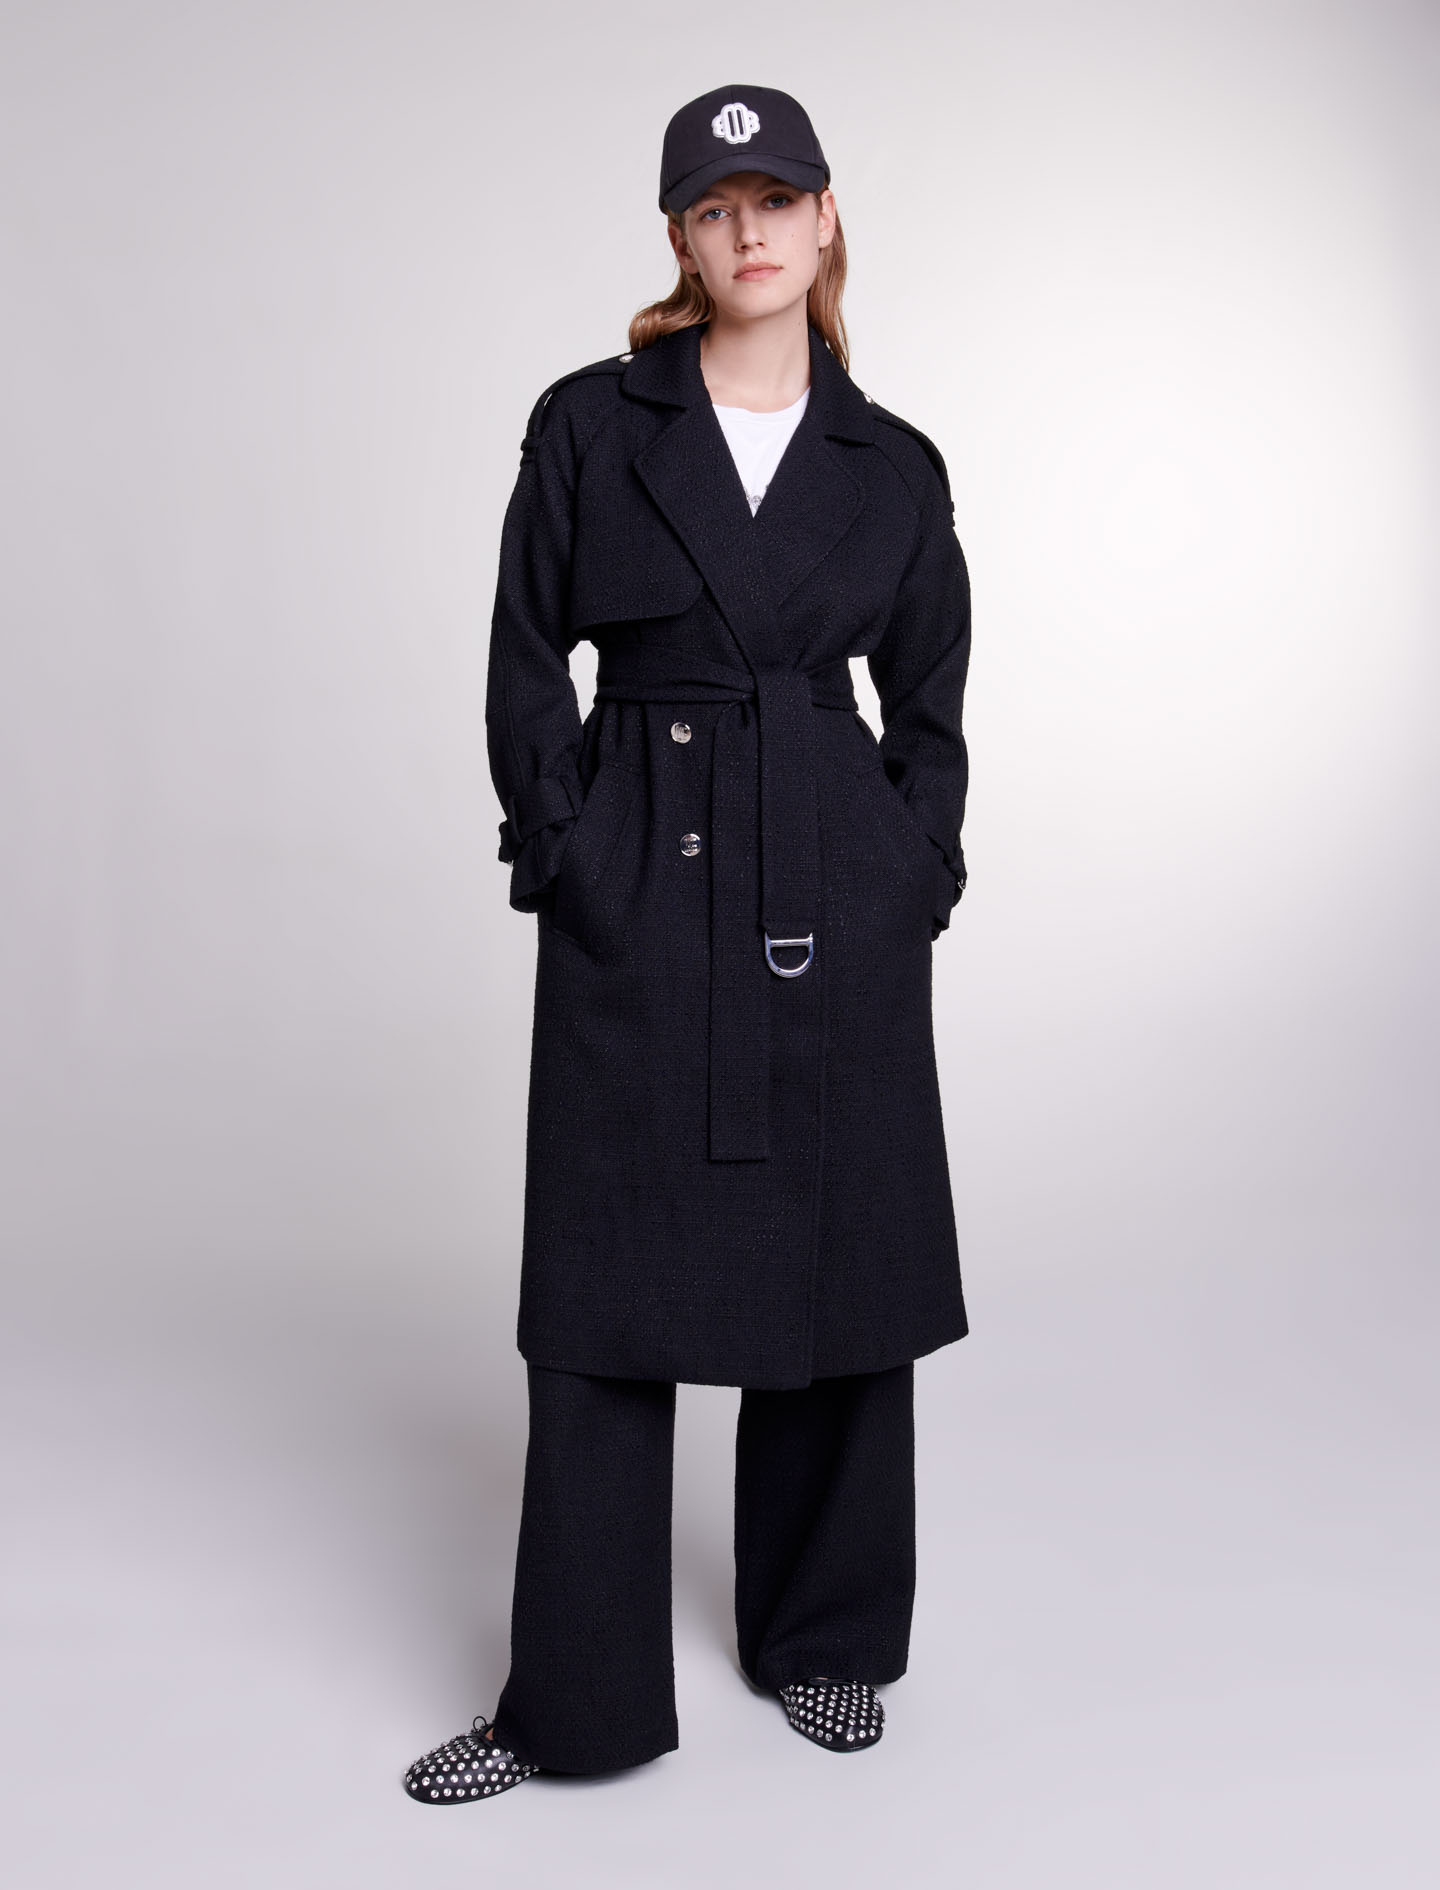 Maje Woman's polyester Lining: Tweed trench coat for Spring/Summer, in color Black / Black